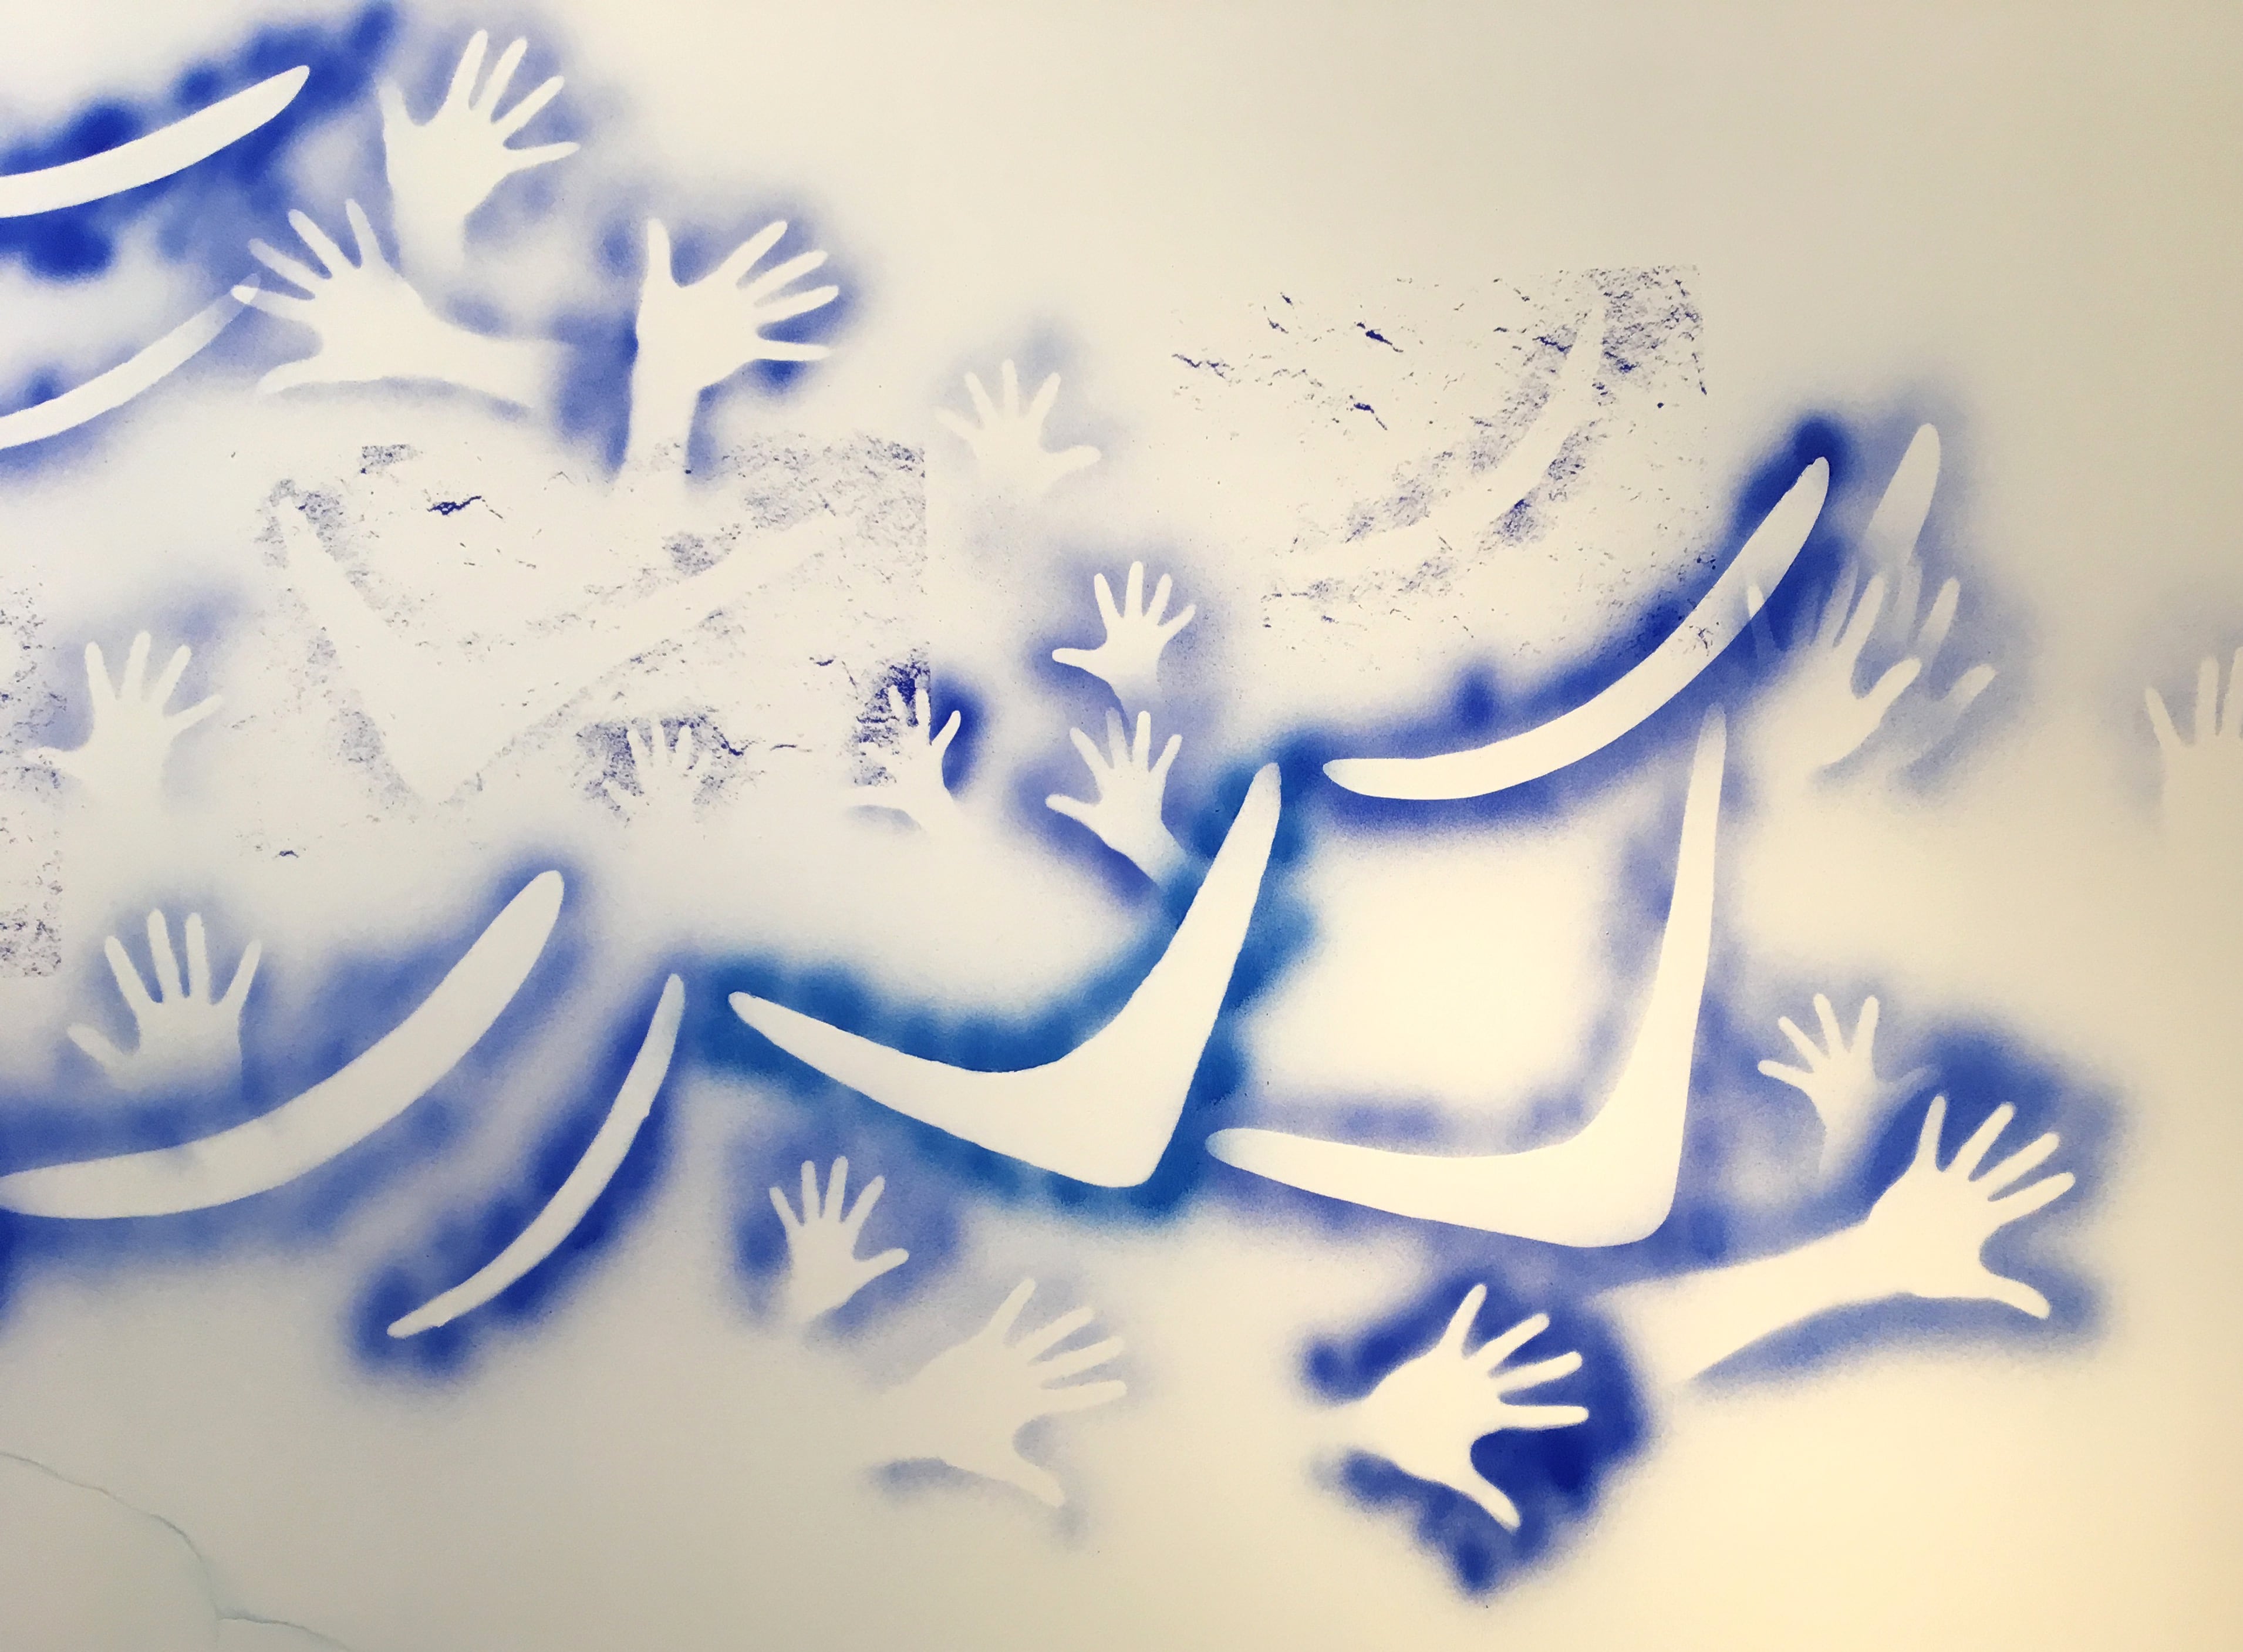 Image 02: Dale Harding, *Composite Wall Panel: Reckitt’s Blue* (detail), 2017, three silkscreened prints with mural, print: approx. 177x456cm each, mural dimensions variable.